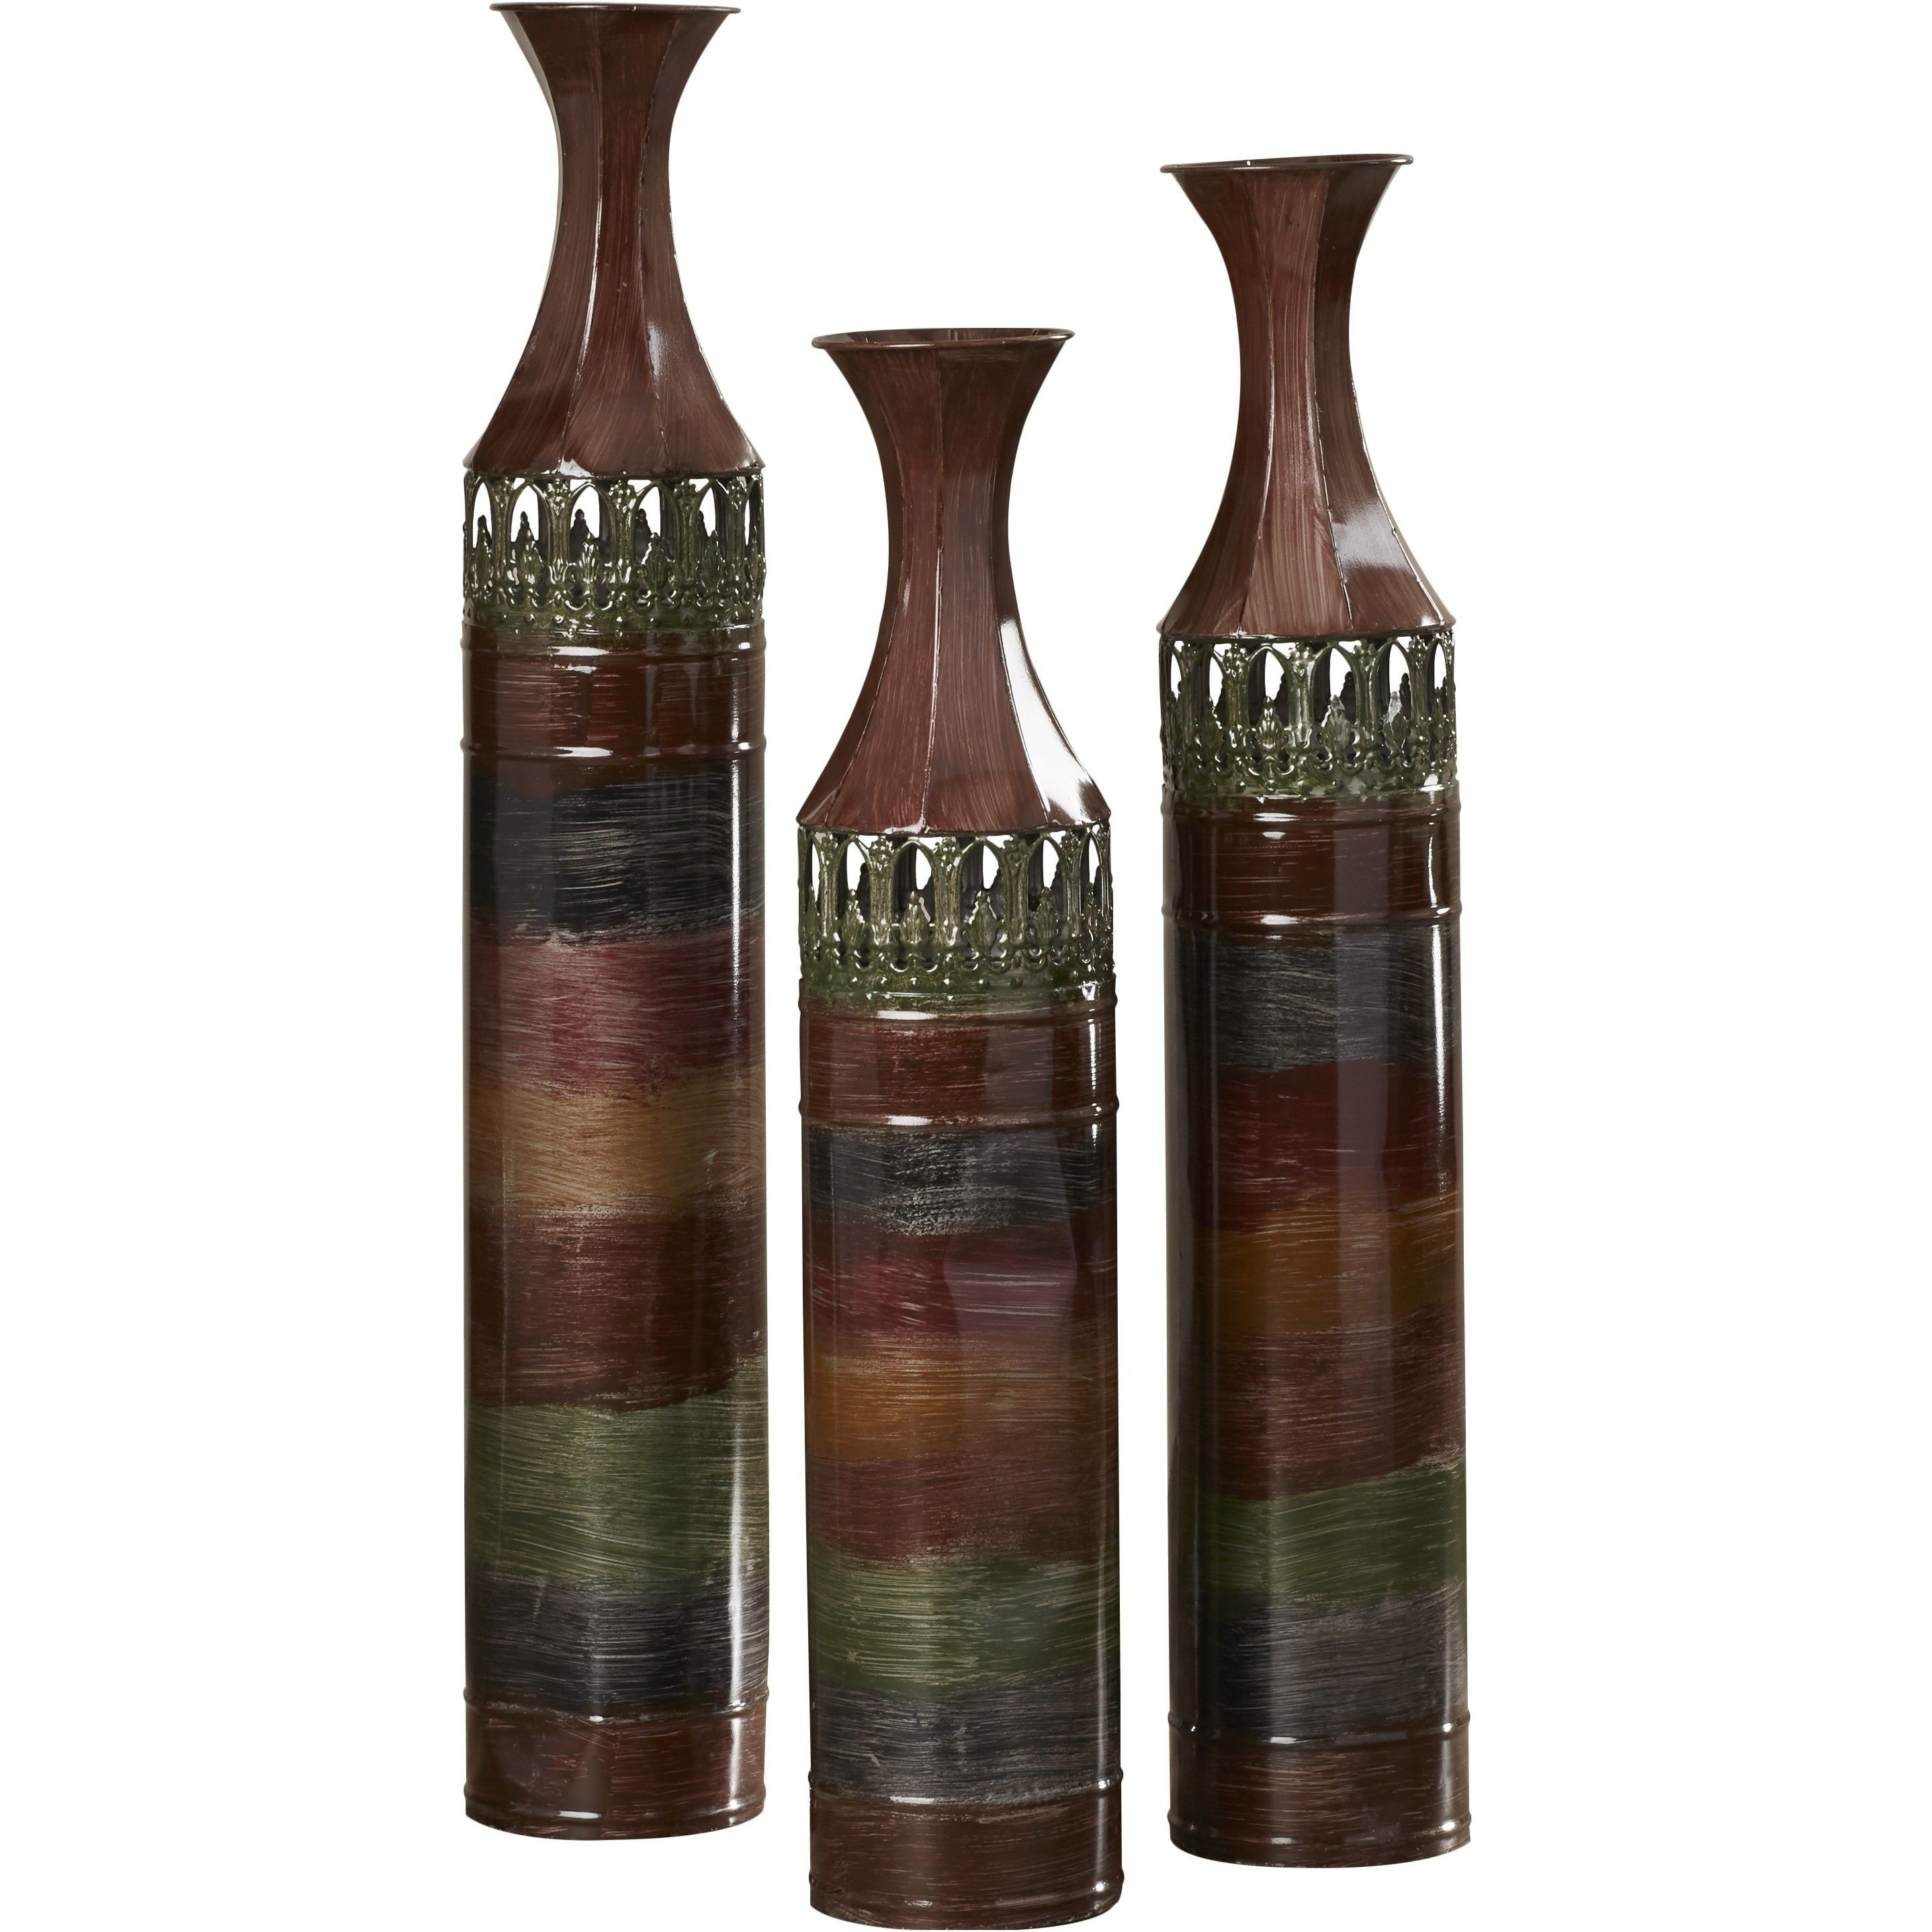 26 Great Home Goods Tall Vases 2024 free download home goods tall vases of 23 floor vases at home goods the weekly world regarding home design tall decorative floor vases lovely vases floor vase